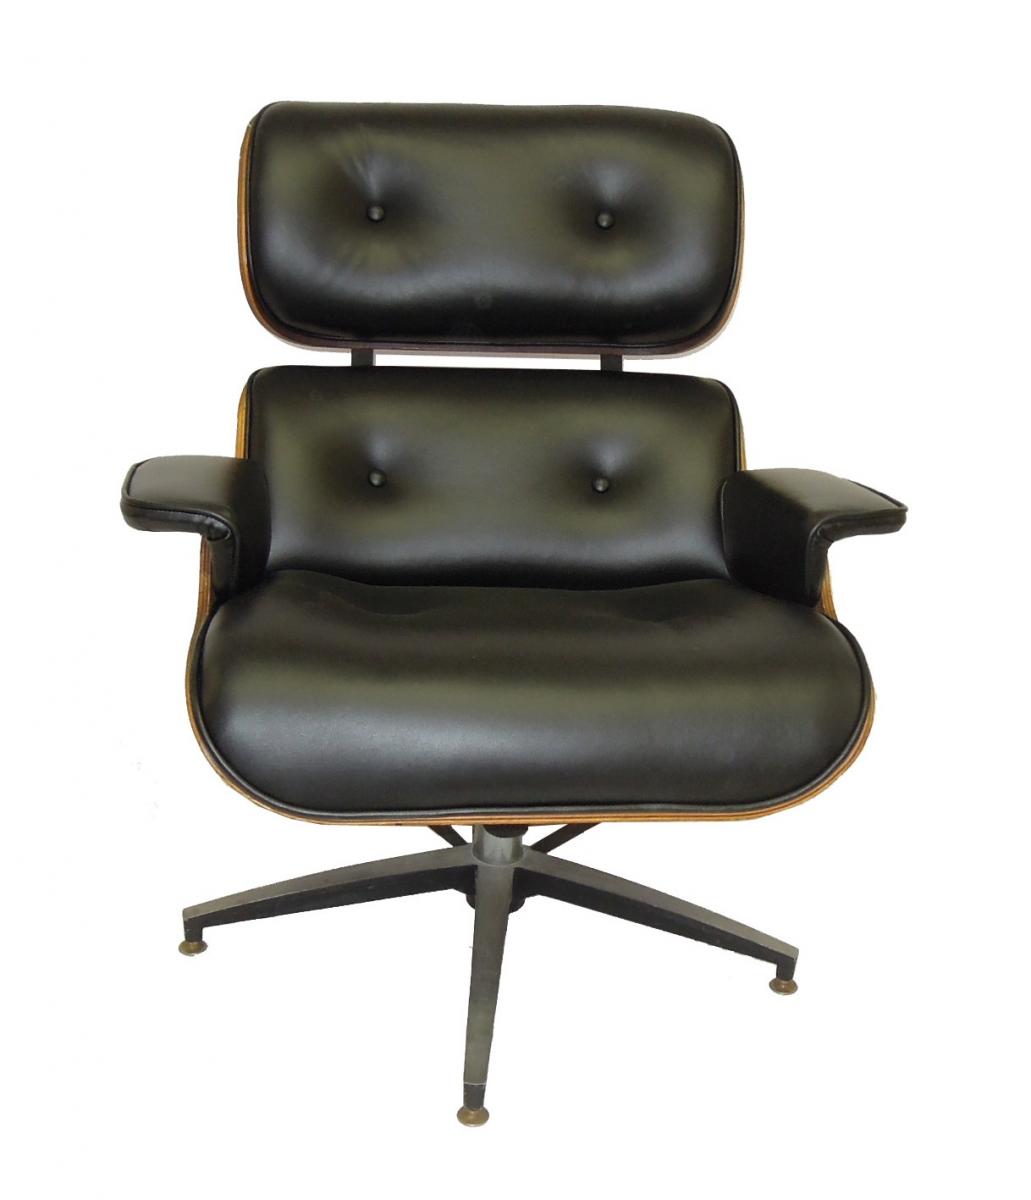 Eames Lounge Chair Reupholstered in Black Leather